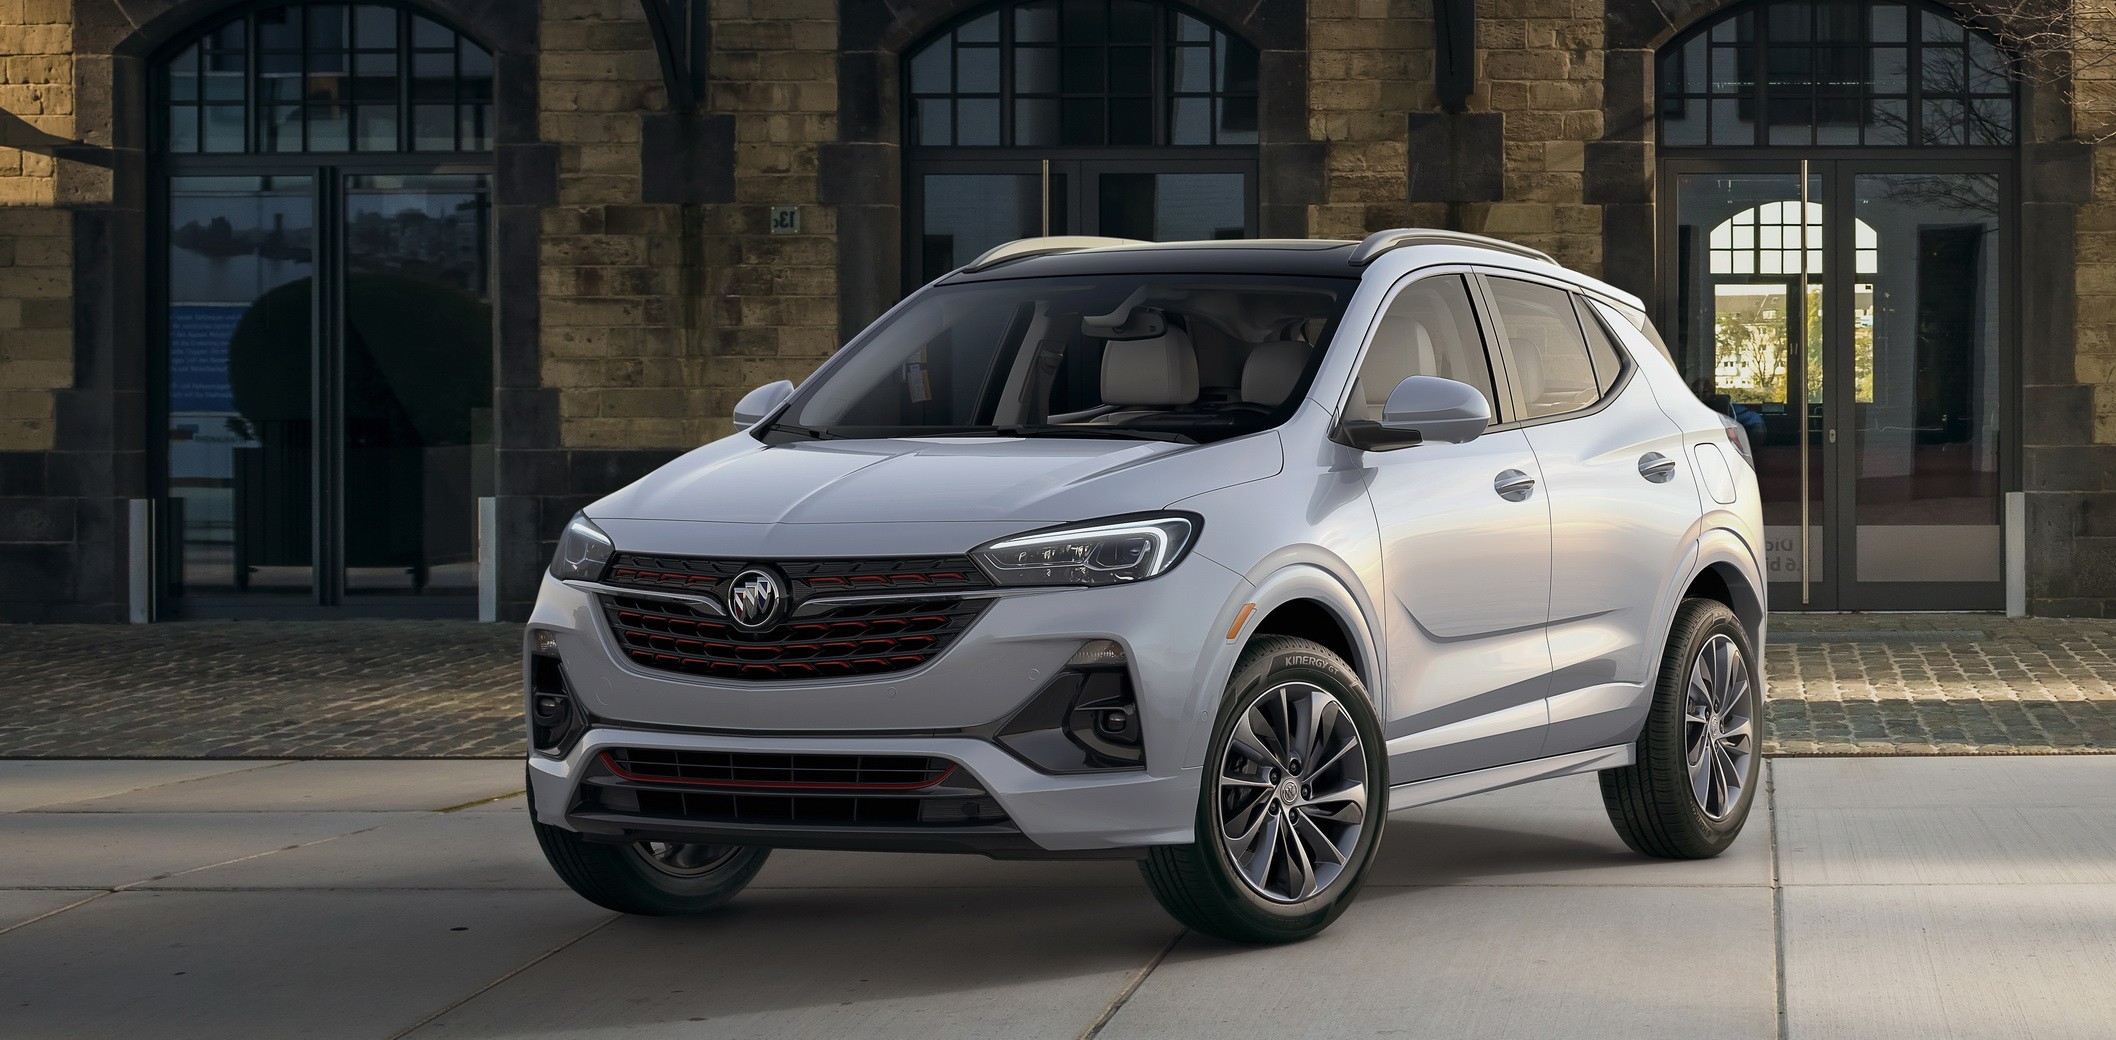 2020-buick-encore-gx-first-review-finds-rough-ride-noisy-1-3-liter